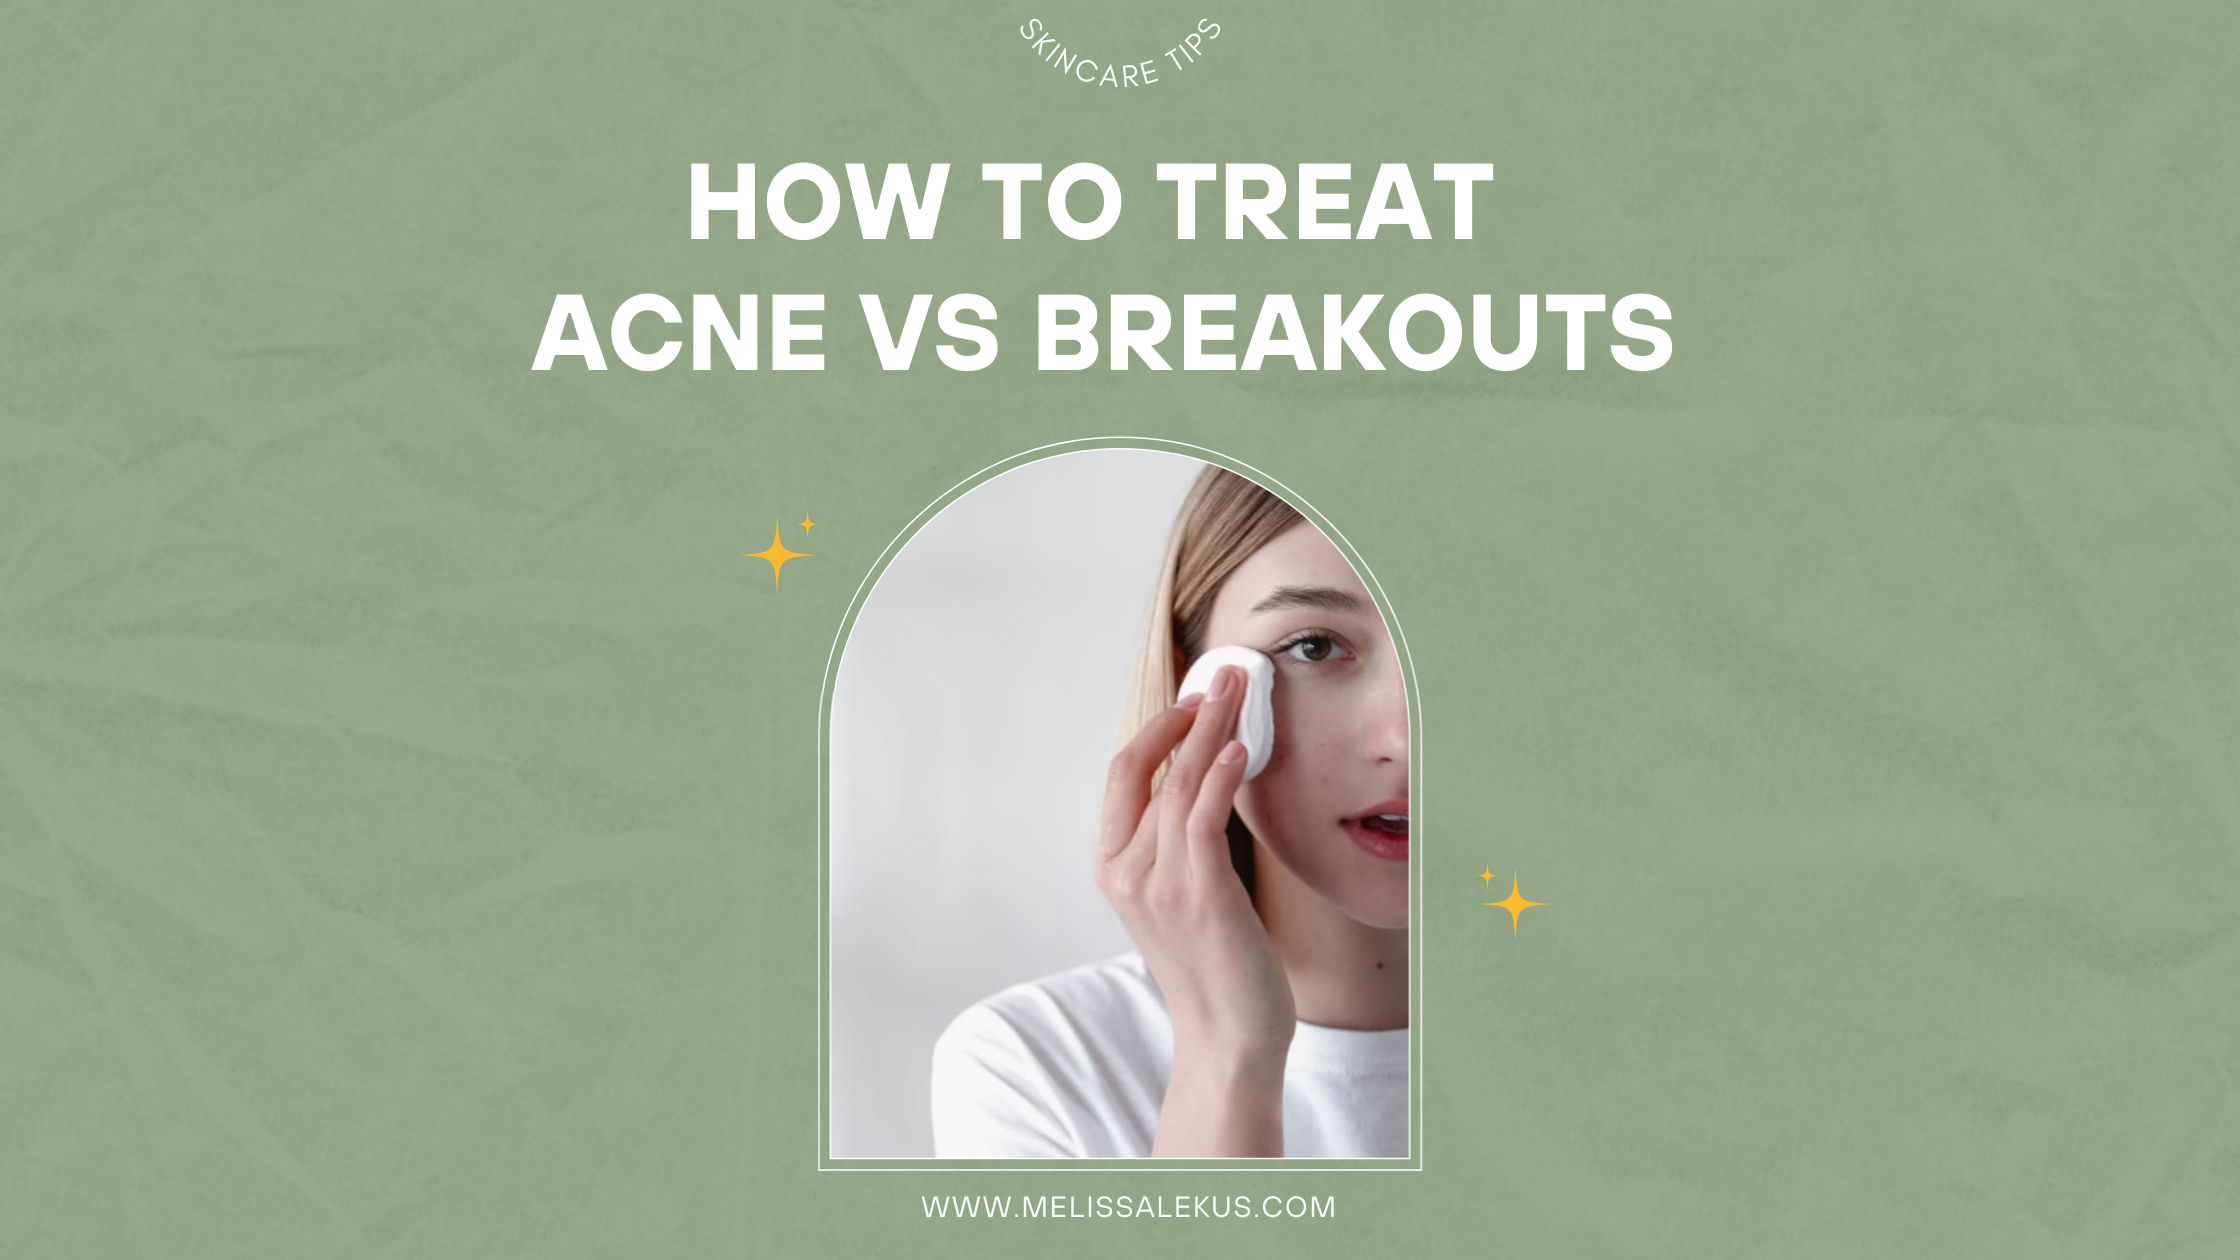 What to know about acne versus breakouts